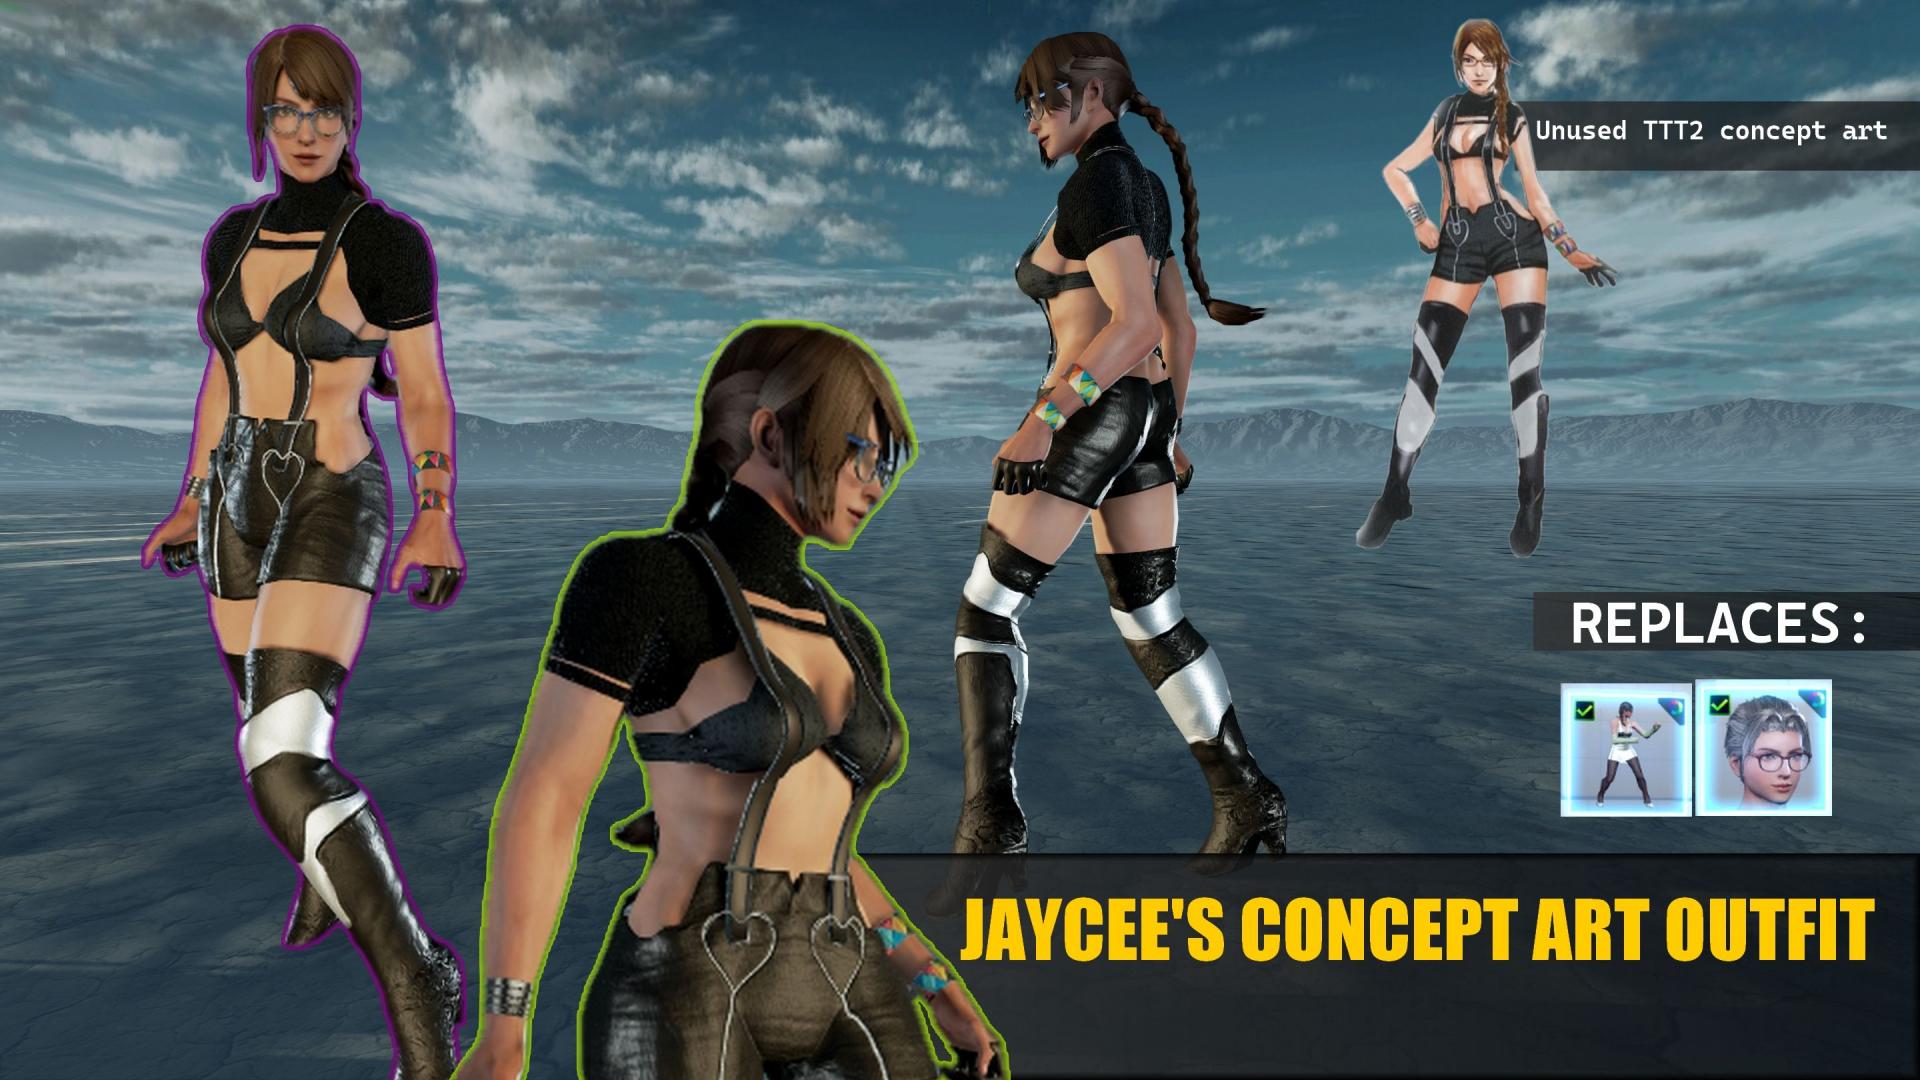 Jaycee's Concept Art Outfit